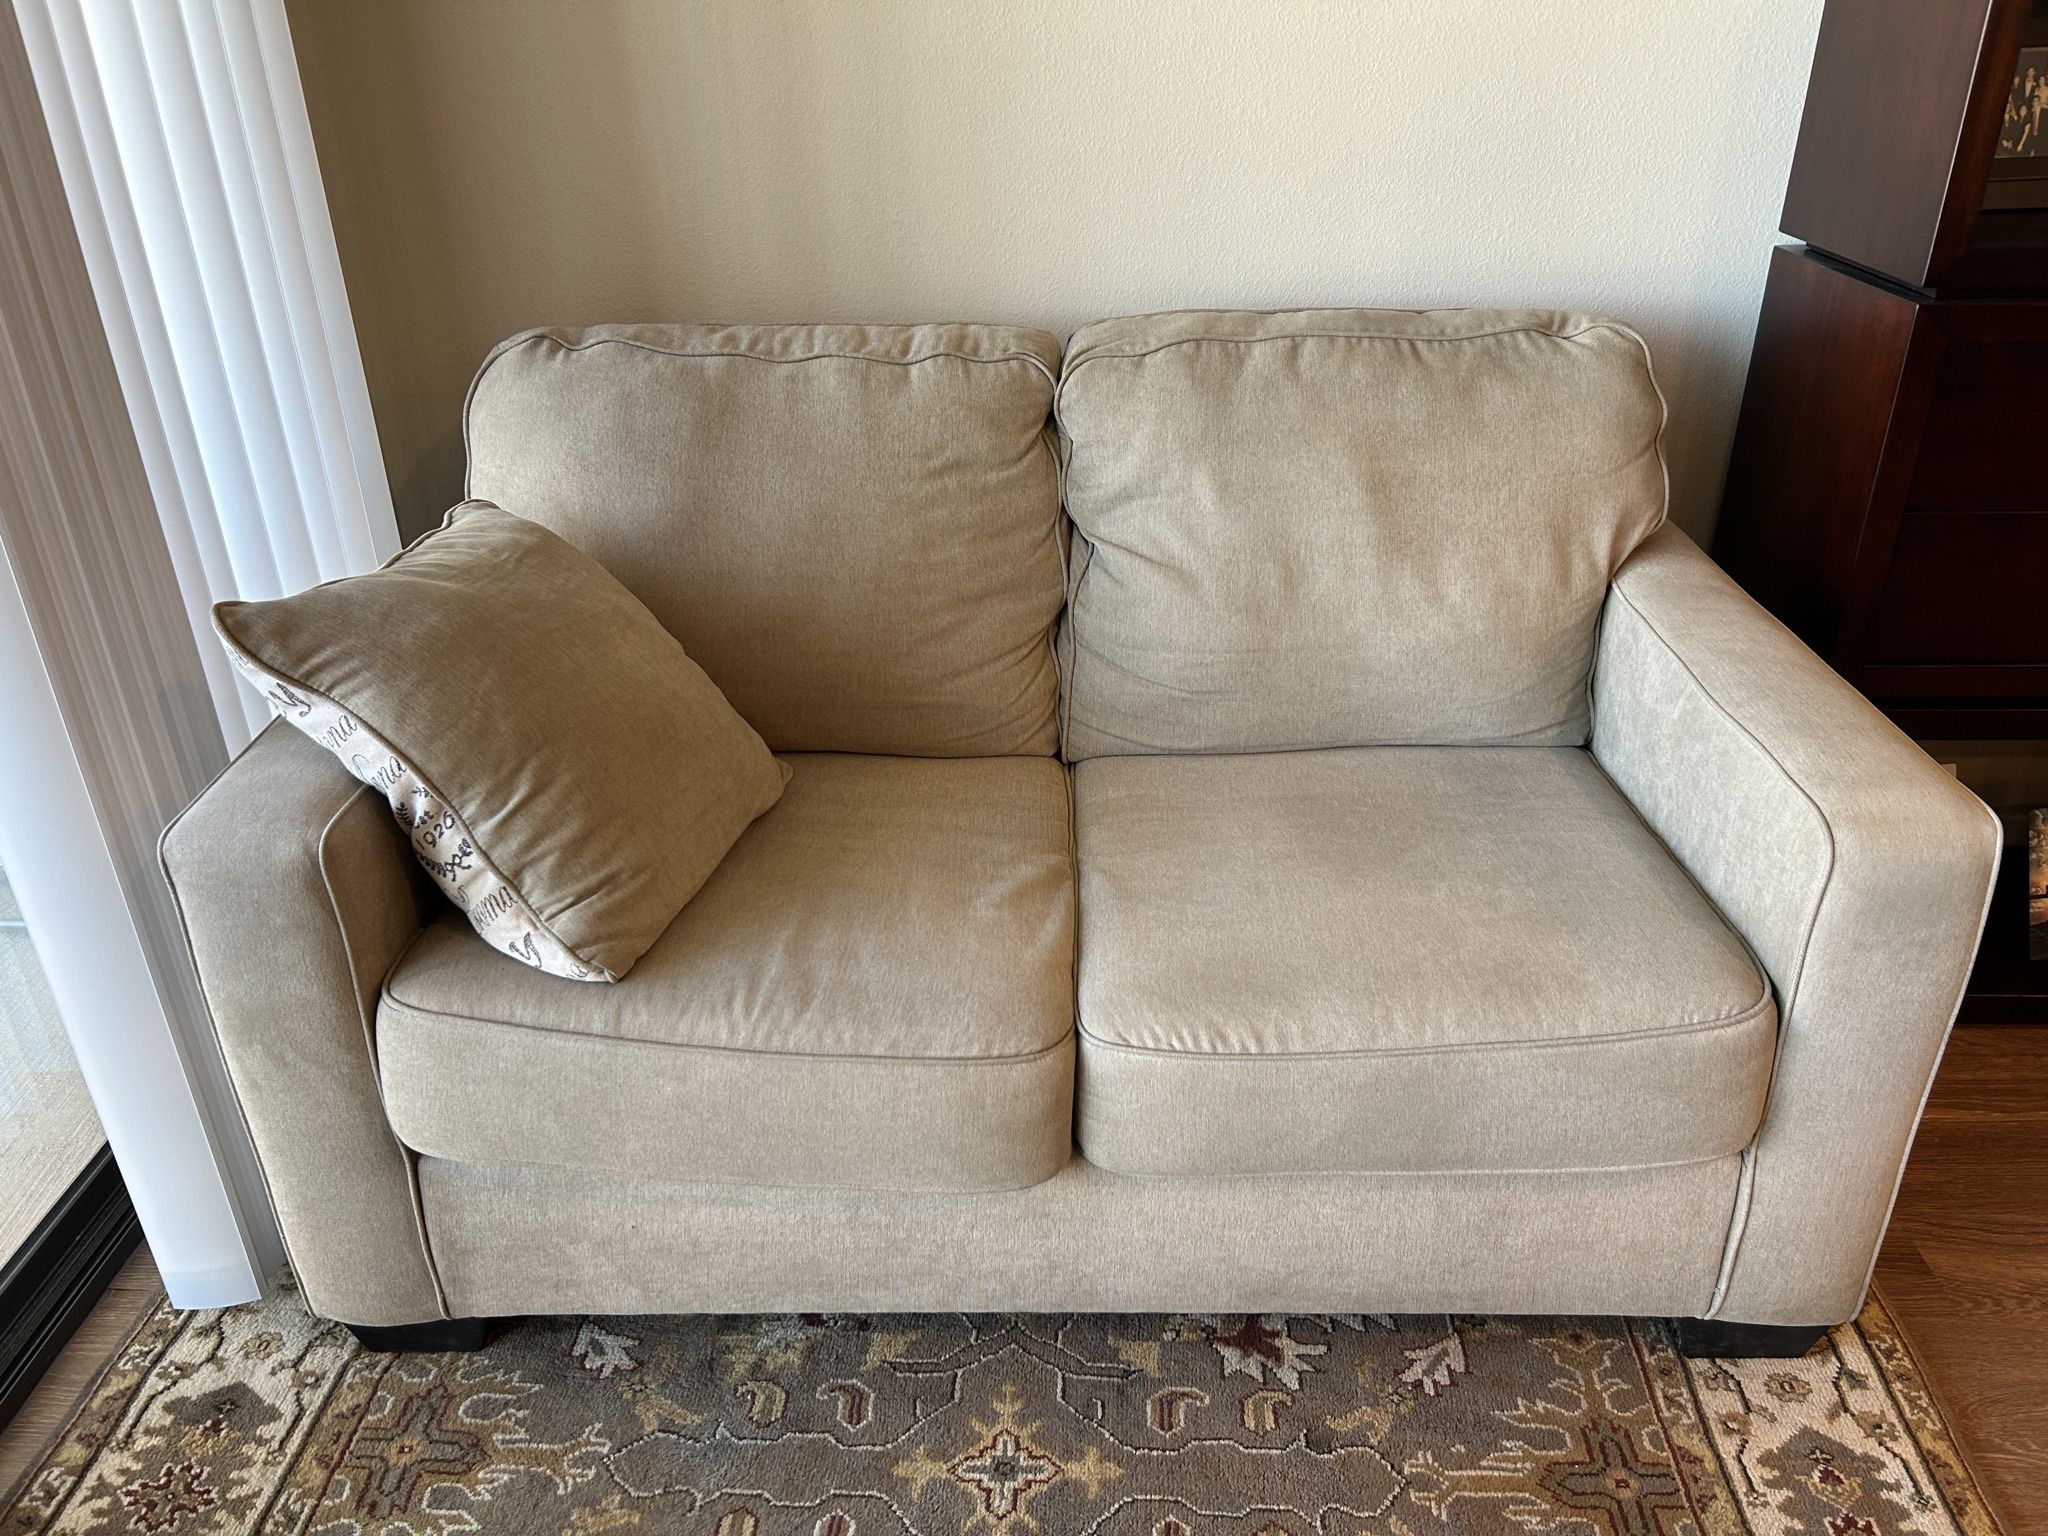 Loveseat For Smaller Spaces (Ashley Furniture)